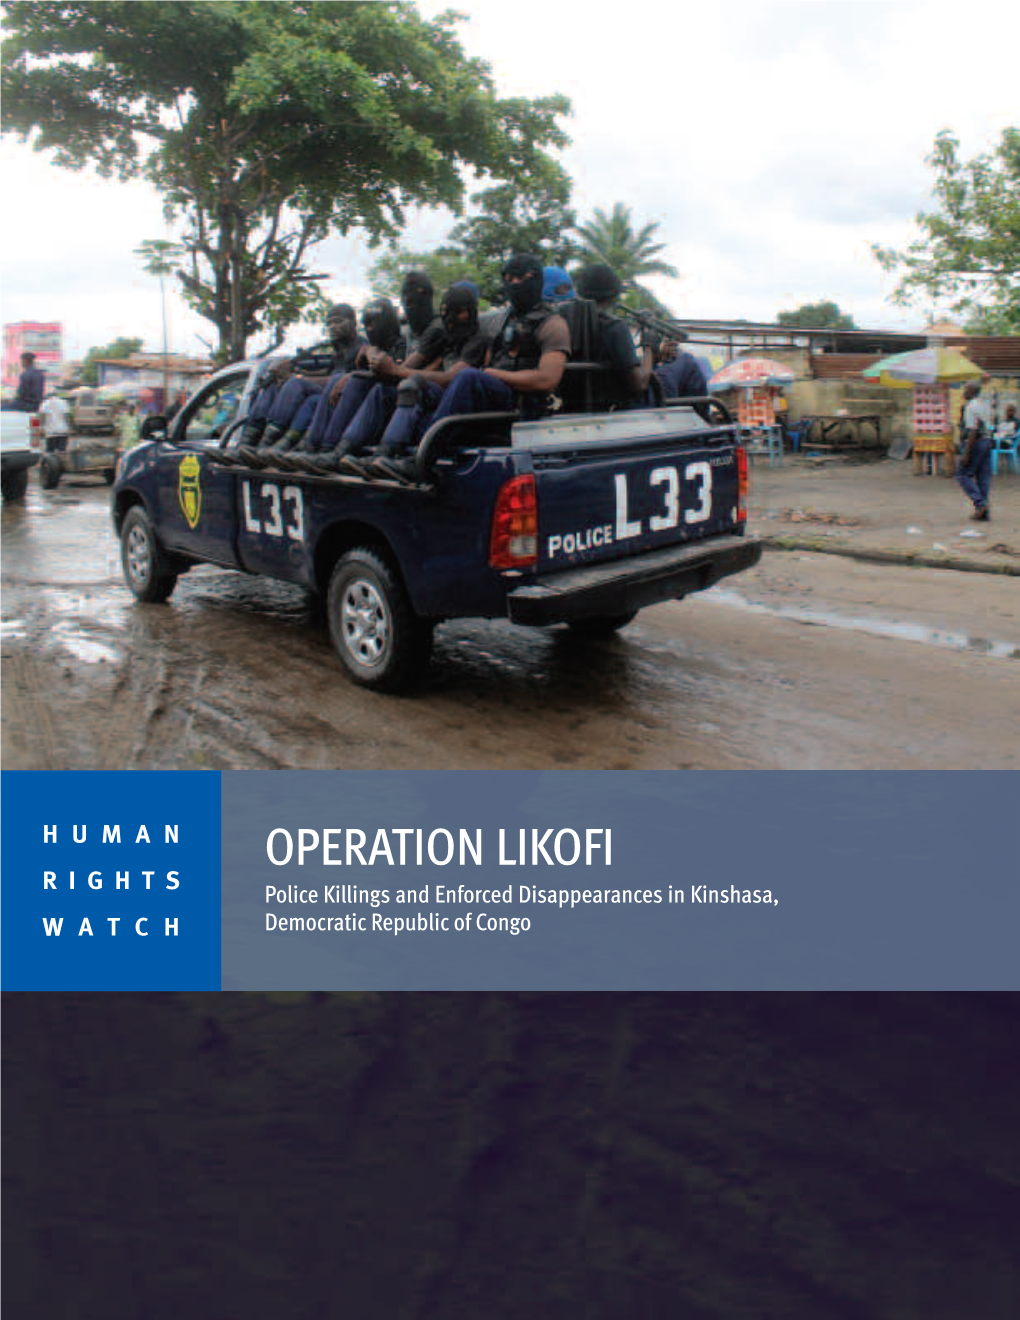 SUSPECTED KULUNA FORCIBLY DISAPPEARED OR KILLED by CONGOLESE POLICE DURING OPERATION LIKOFI in KINSHASA Names of Victims Withheld, on File with Human Rights Watch